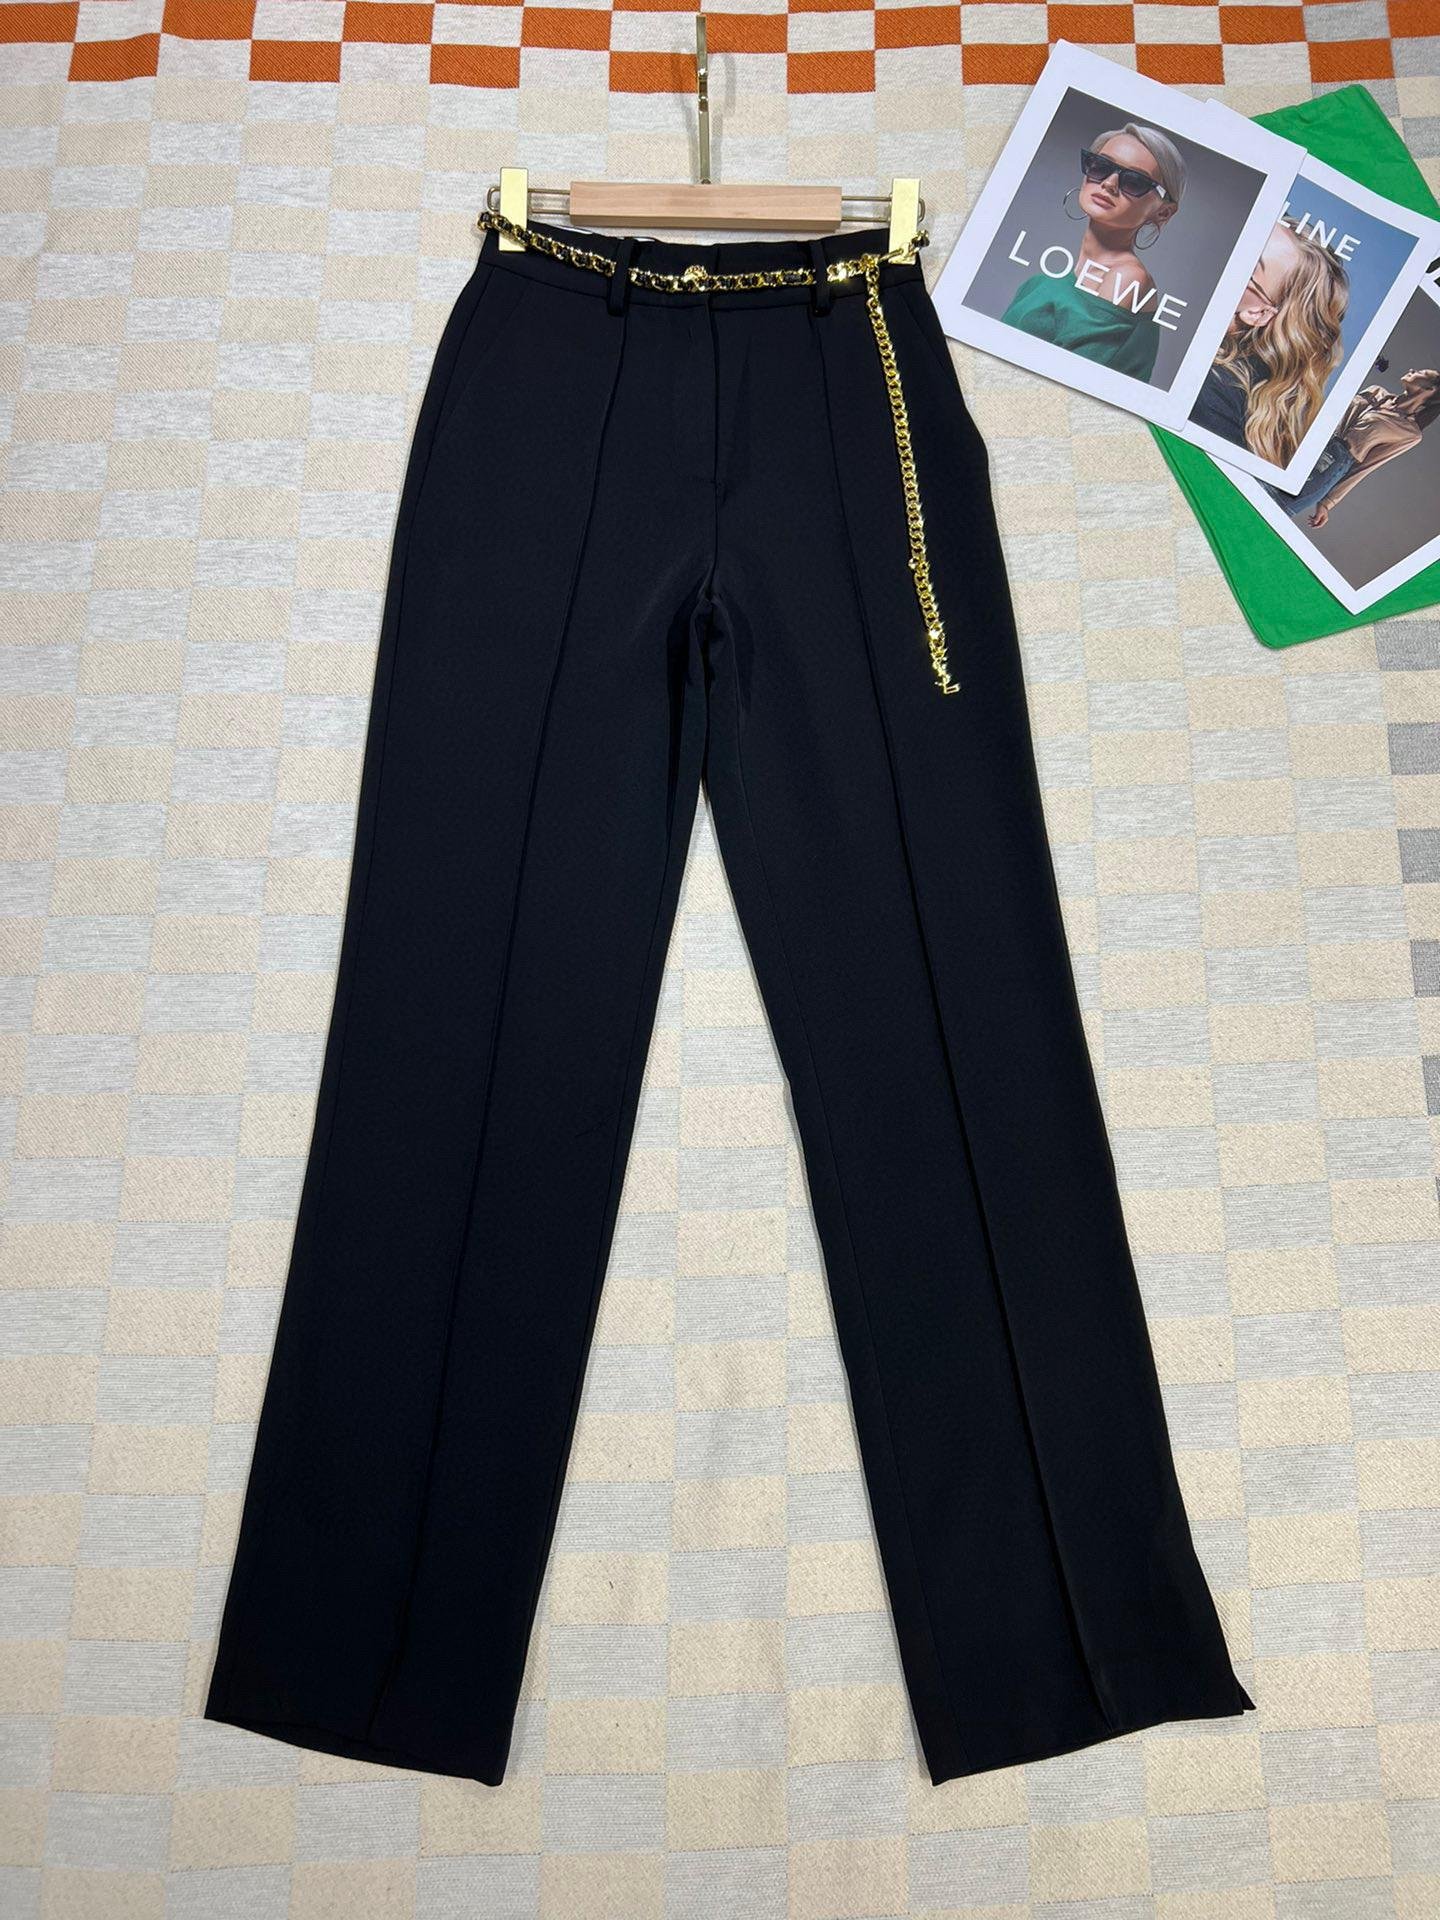 The new spring 2023 Tall waist leisure trousers Customize the fabric cutting wit